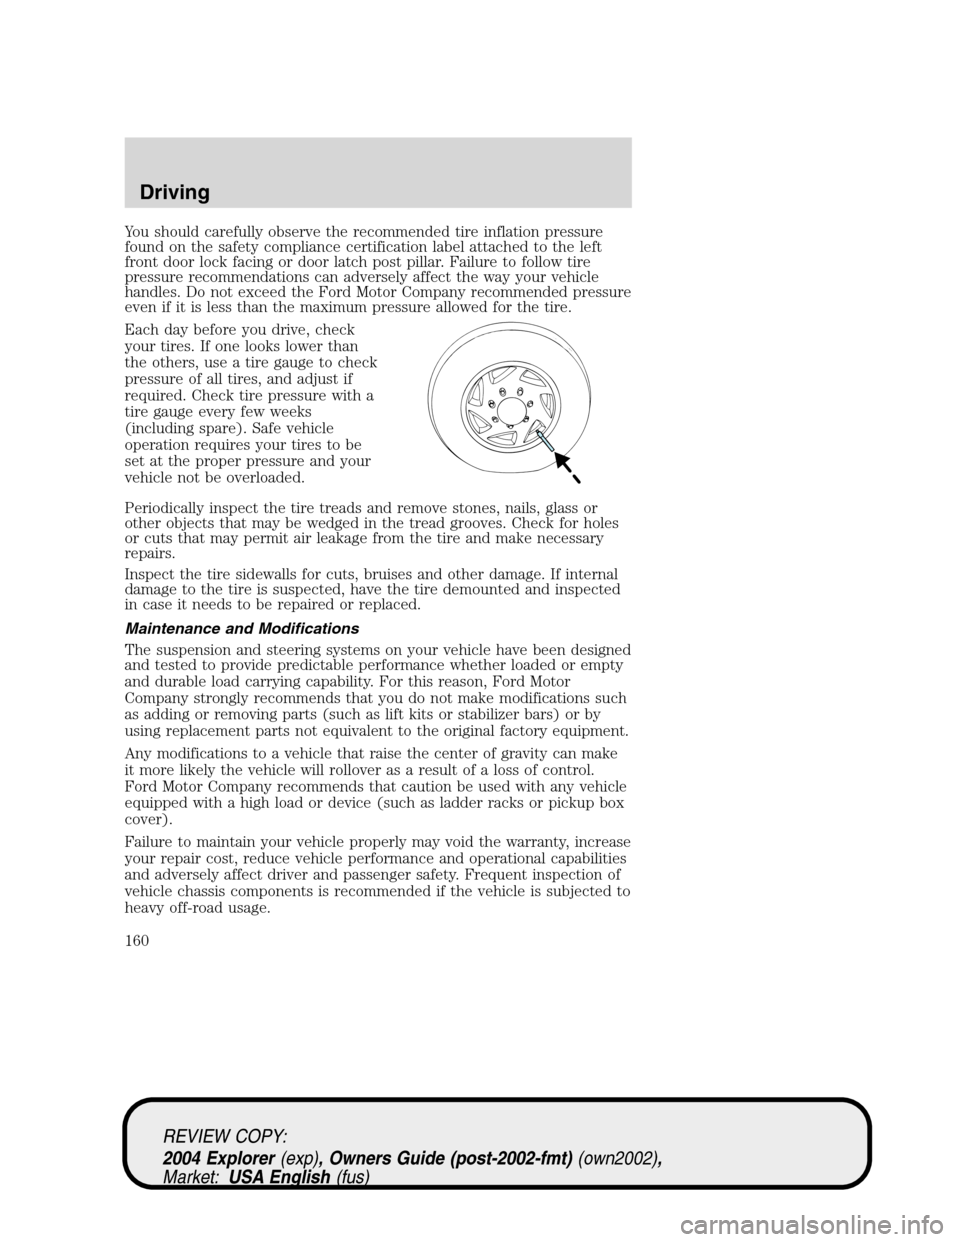 Mercury Mountaineer 2004  Owners Manuals You should carefully observe the recommended tire inflation pressure
found on the safety compliance certification label attached to the left
front door lock facing or door latch post pillar. Failure t